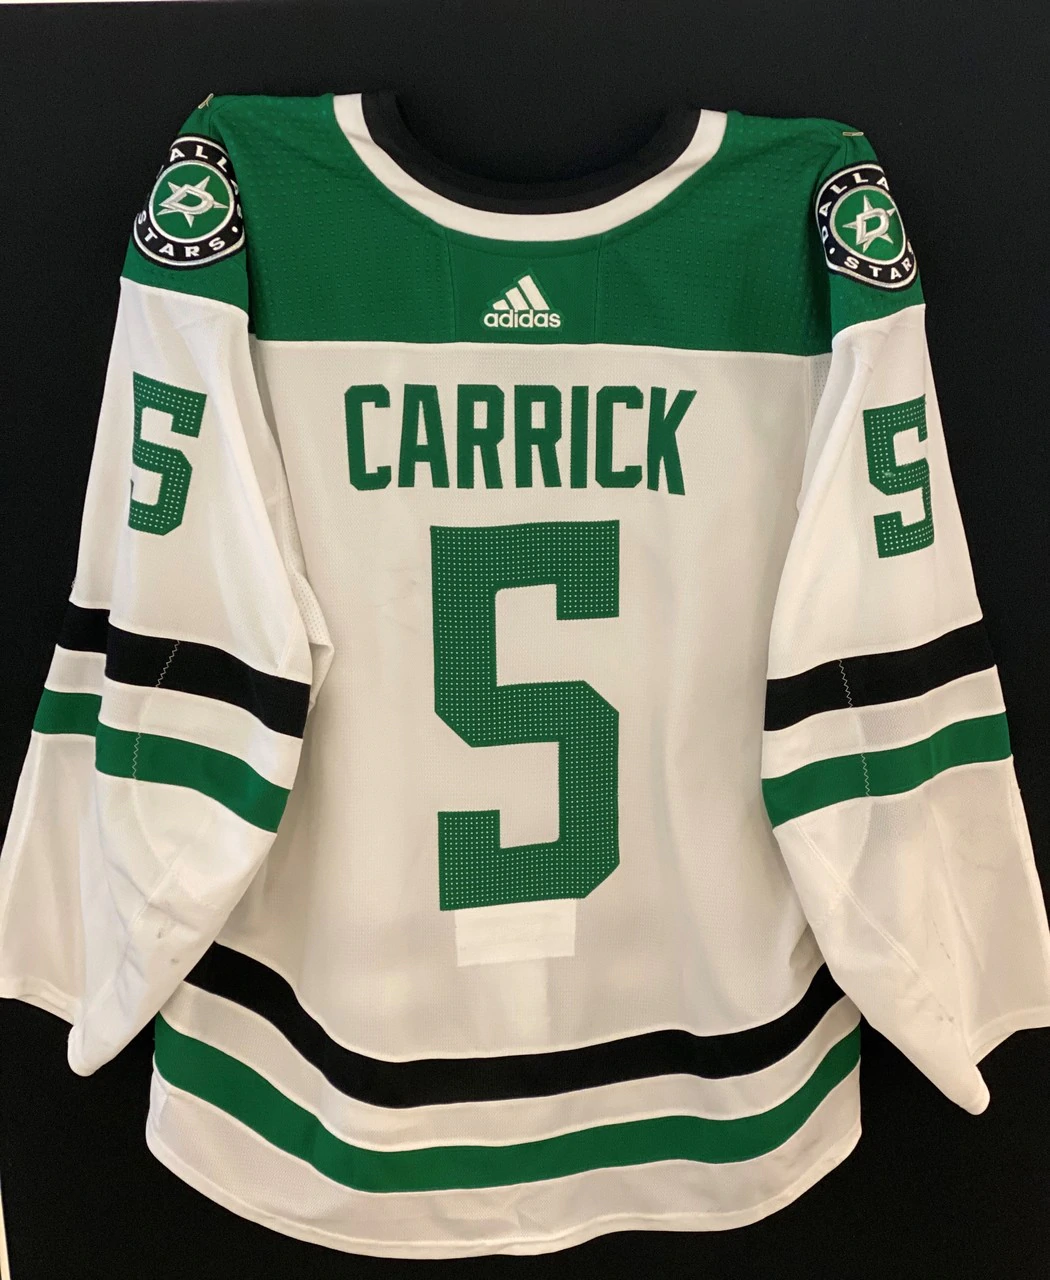 Connor Carrick 18/19 Game Worn Set 2 Away Jersey in White - Back View